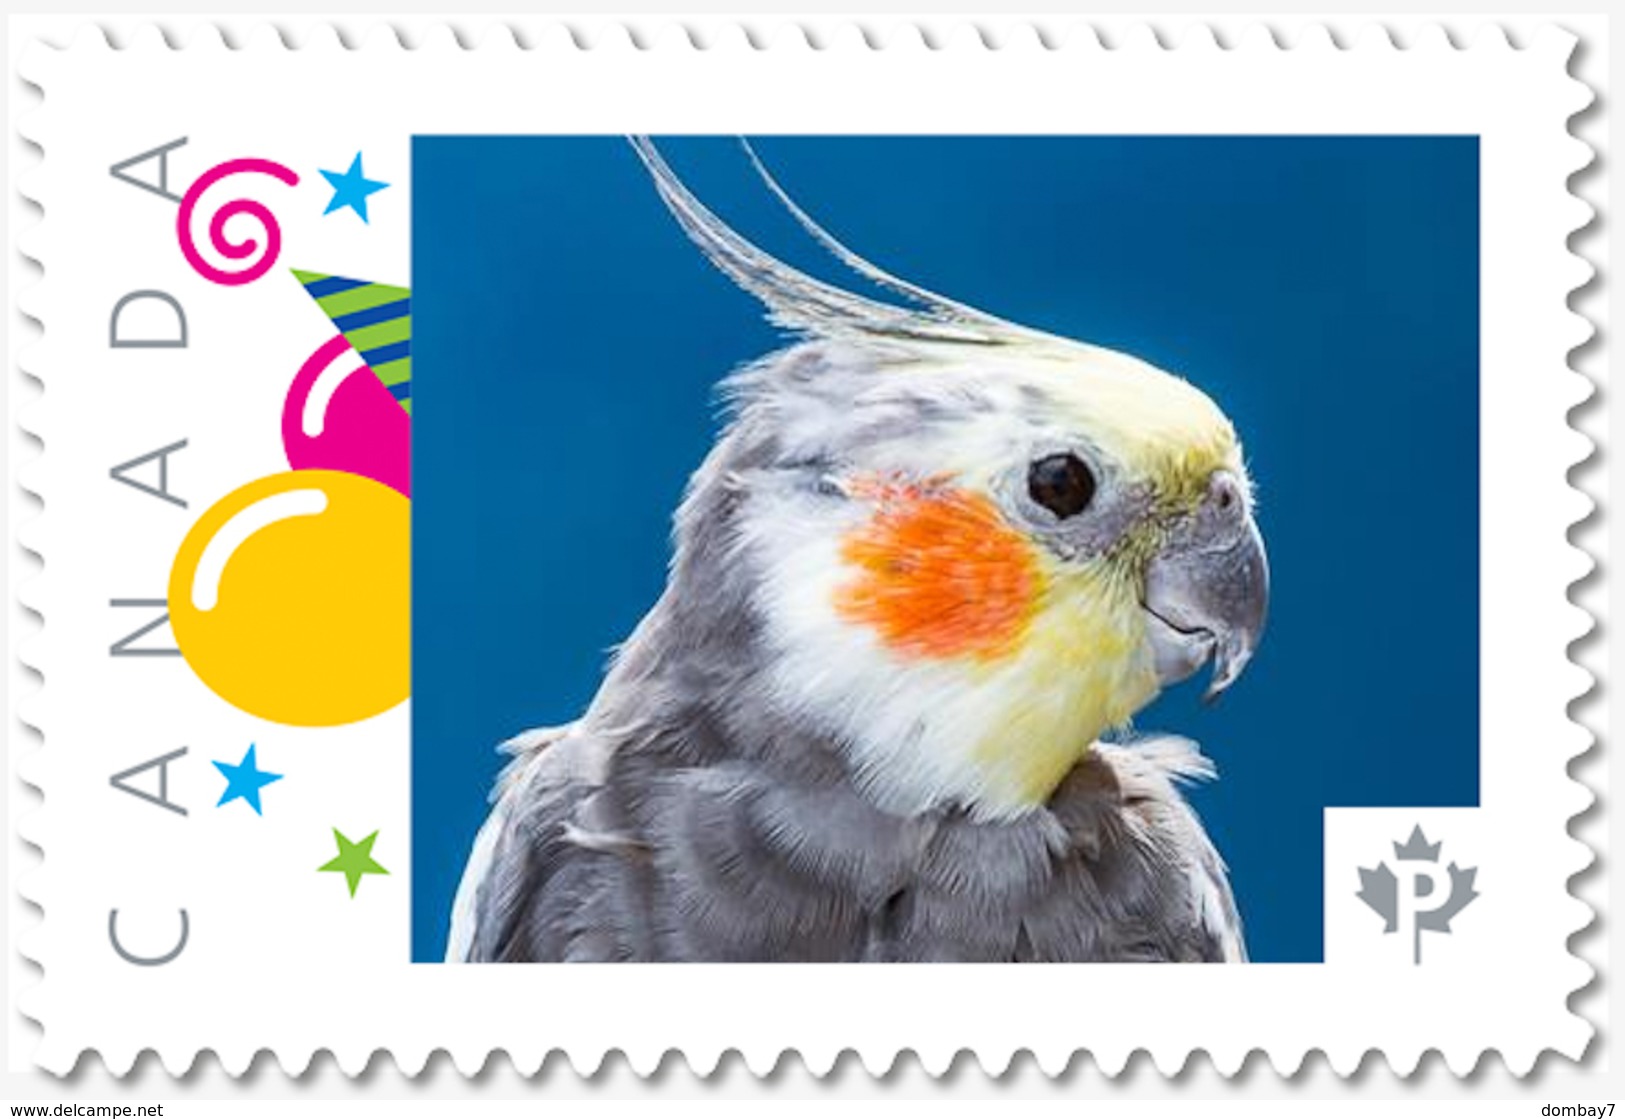 COCKATIEL PARROT, PAPPAGALLO, LORO, PAPAGEI, PERROQUET, EXOTIC Personalized Postage Stamp MNH Canada 2018 P18-06sn04 - Parrots